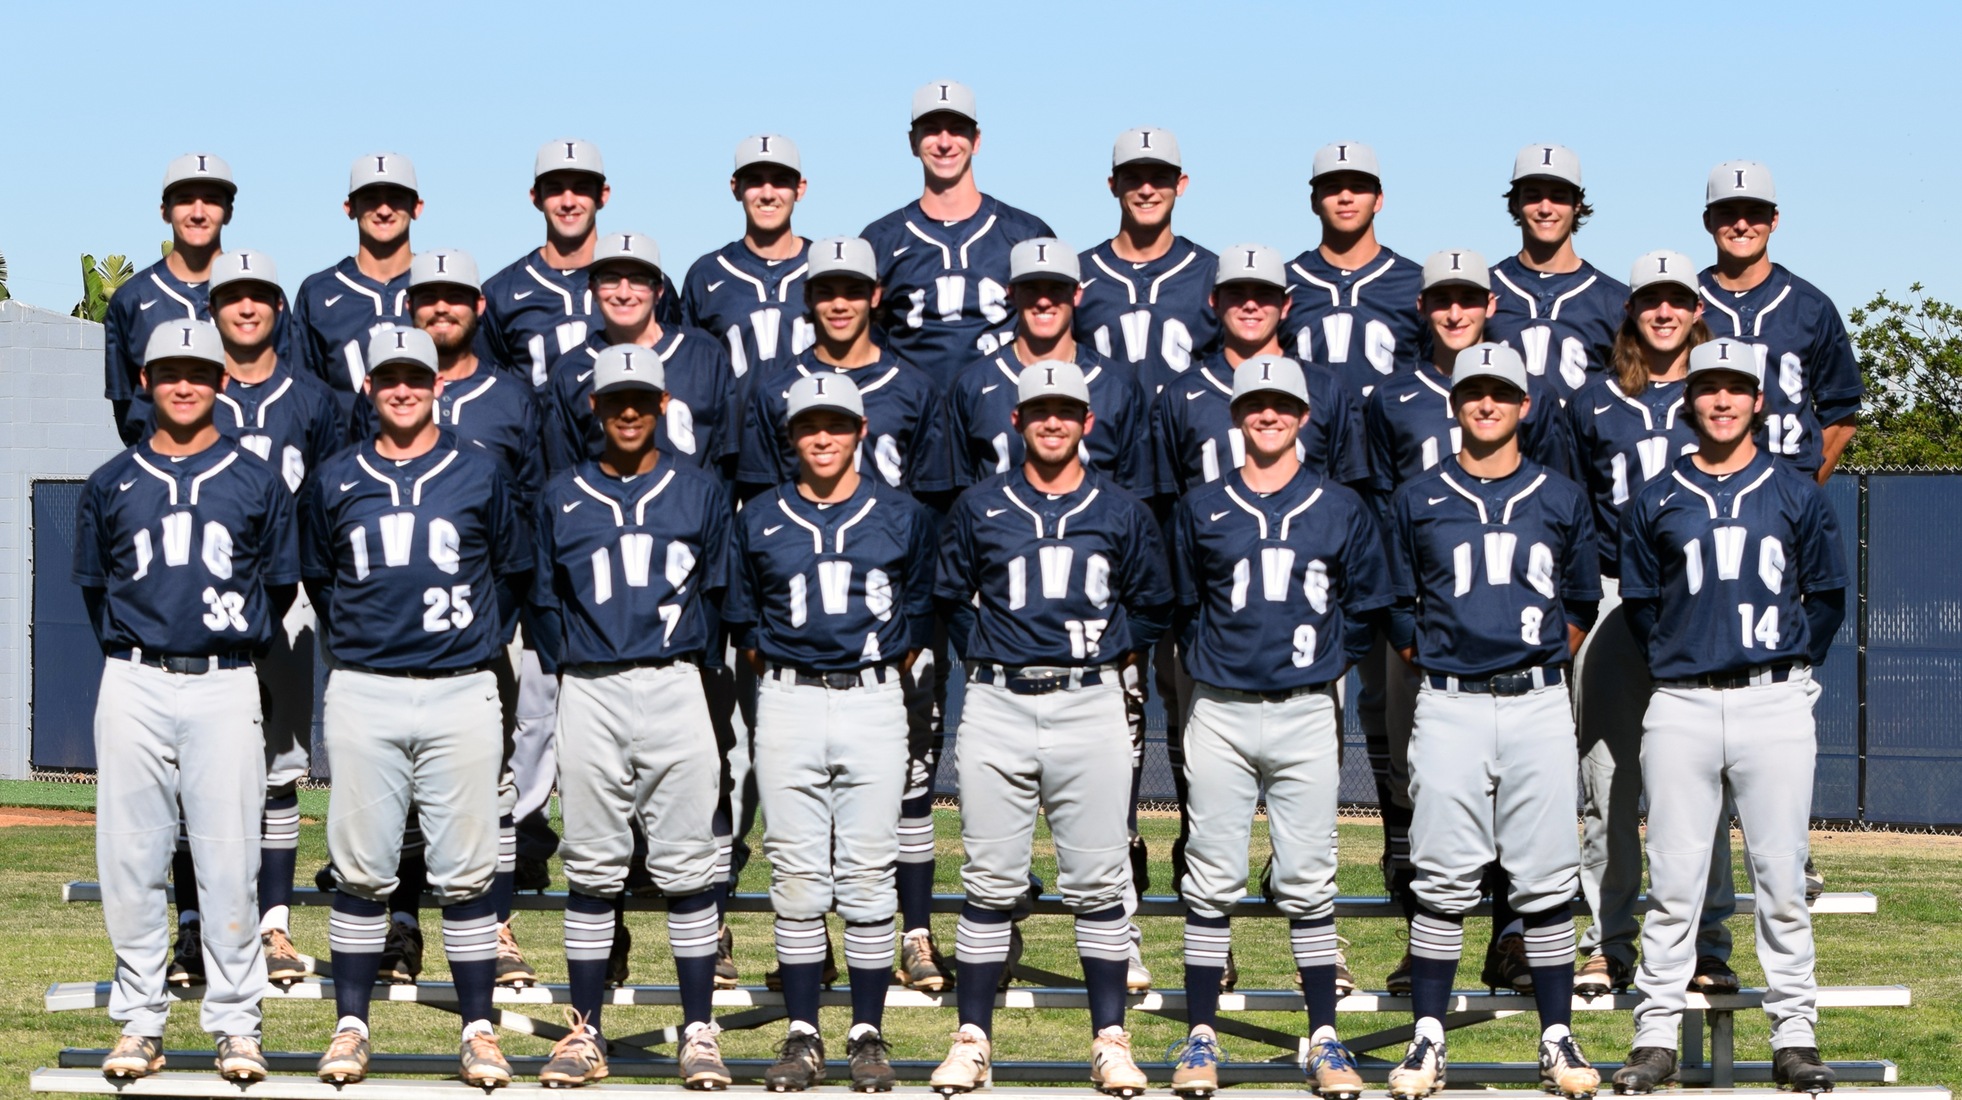 Baseball recognized as Irvine Valley's Scholar Team of the Year